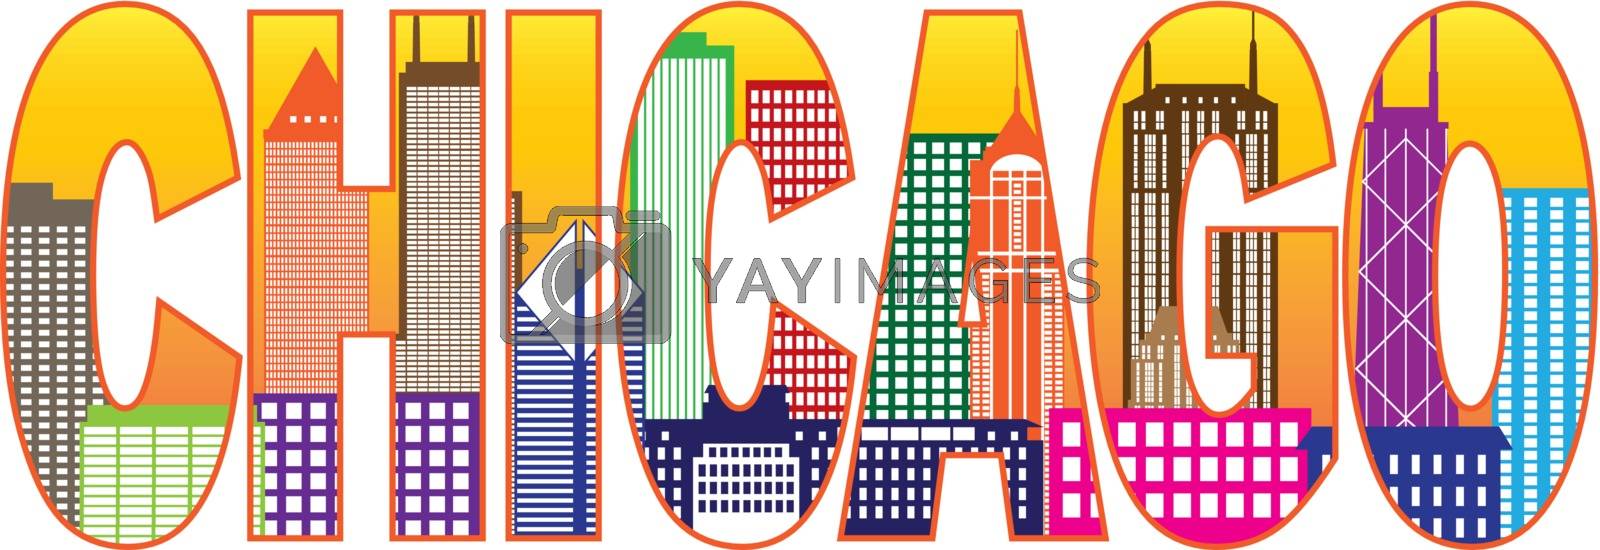 Royalty free image of Chicago City Skyline Color Text Illustration by jpldesigns